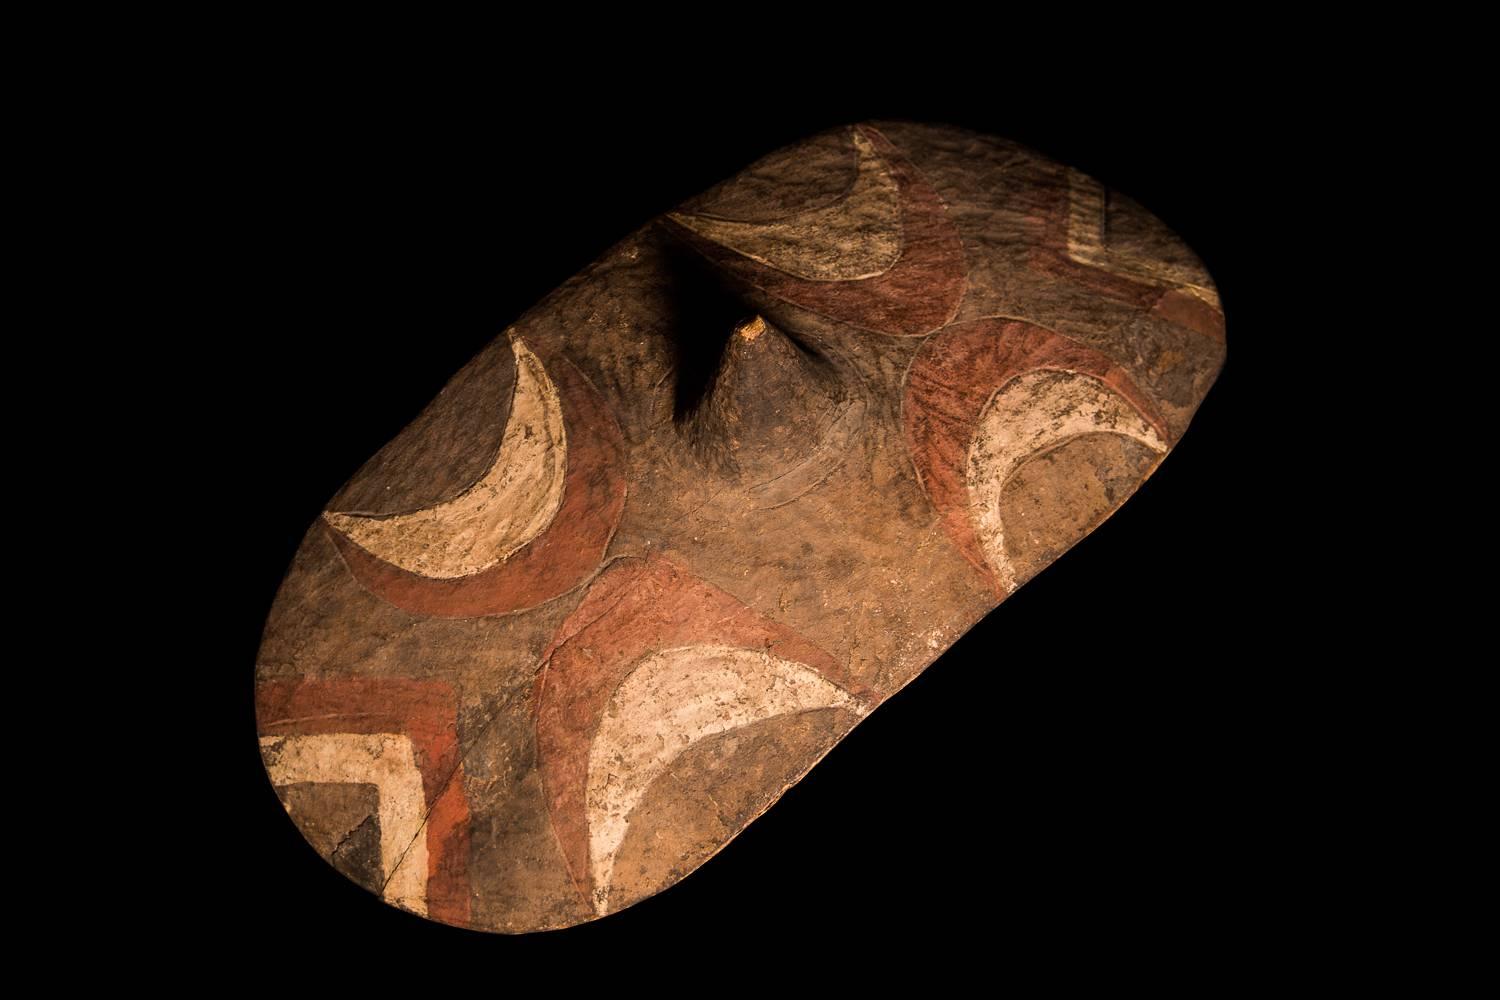 An elliptical shield of the Tutsi tribe of Burundi. More high than wide and oval in design with looped handle, this shield is made of light wood and is folded inwards. Also used for dancing and rituals, the motifs are variable - in this case